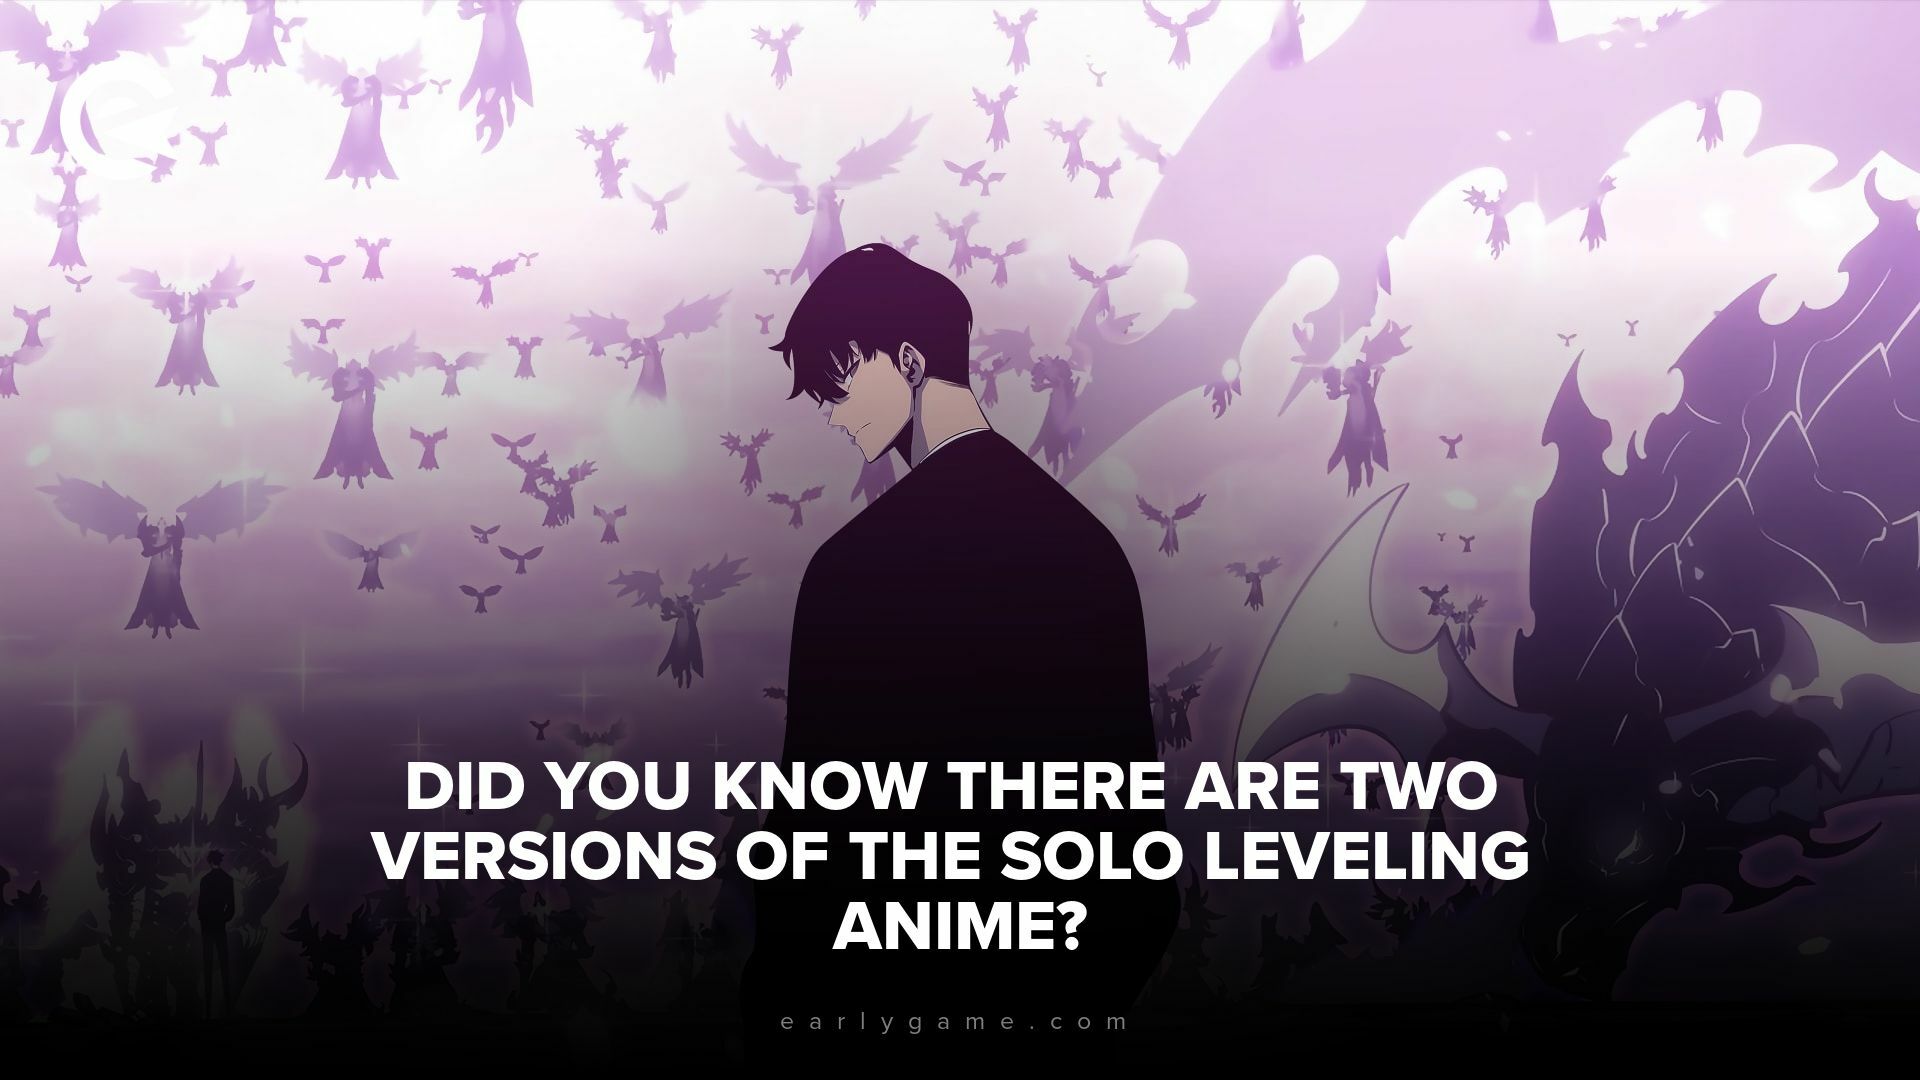 Solo leveling anime version header